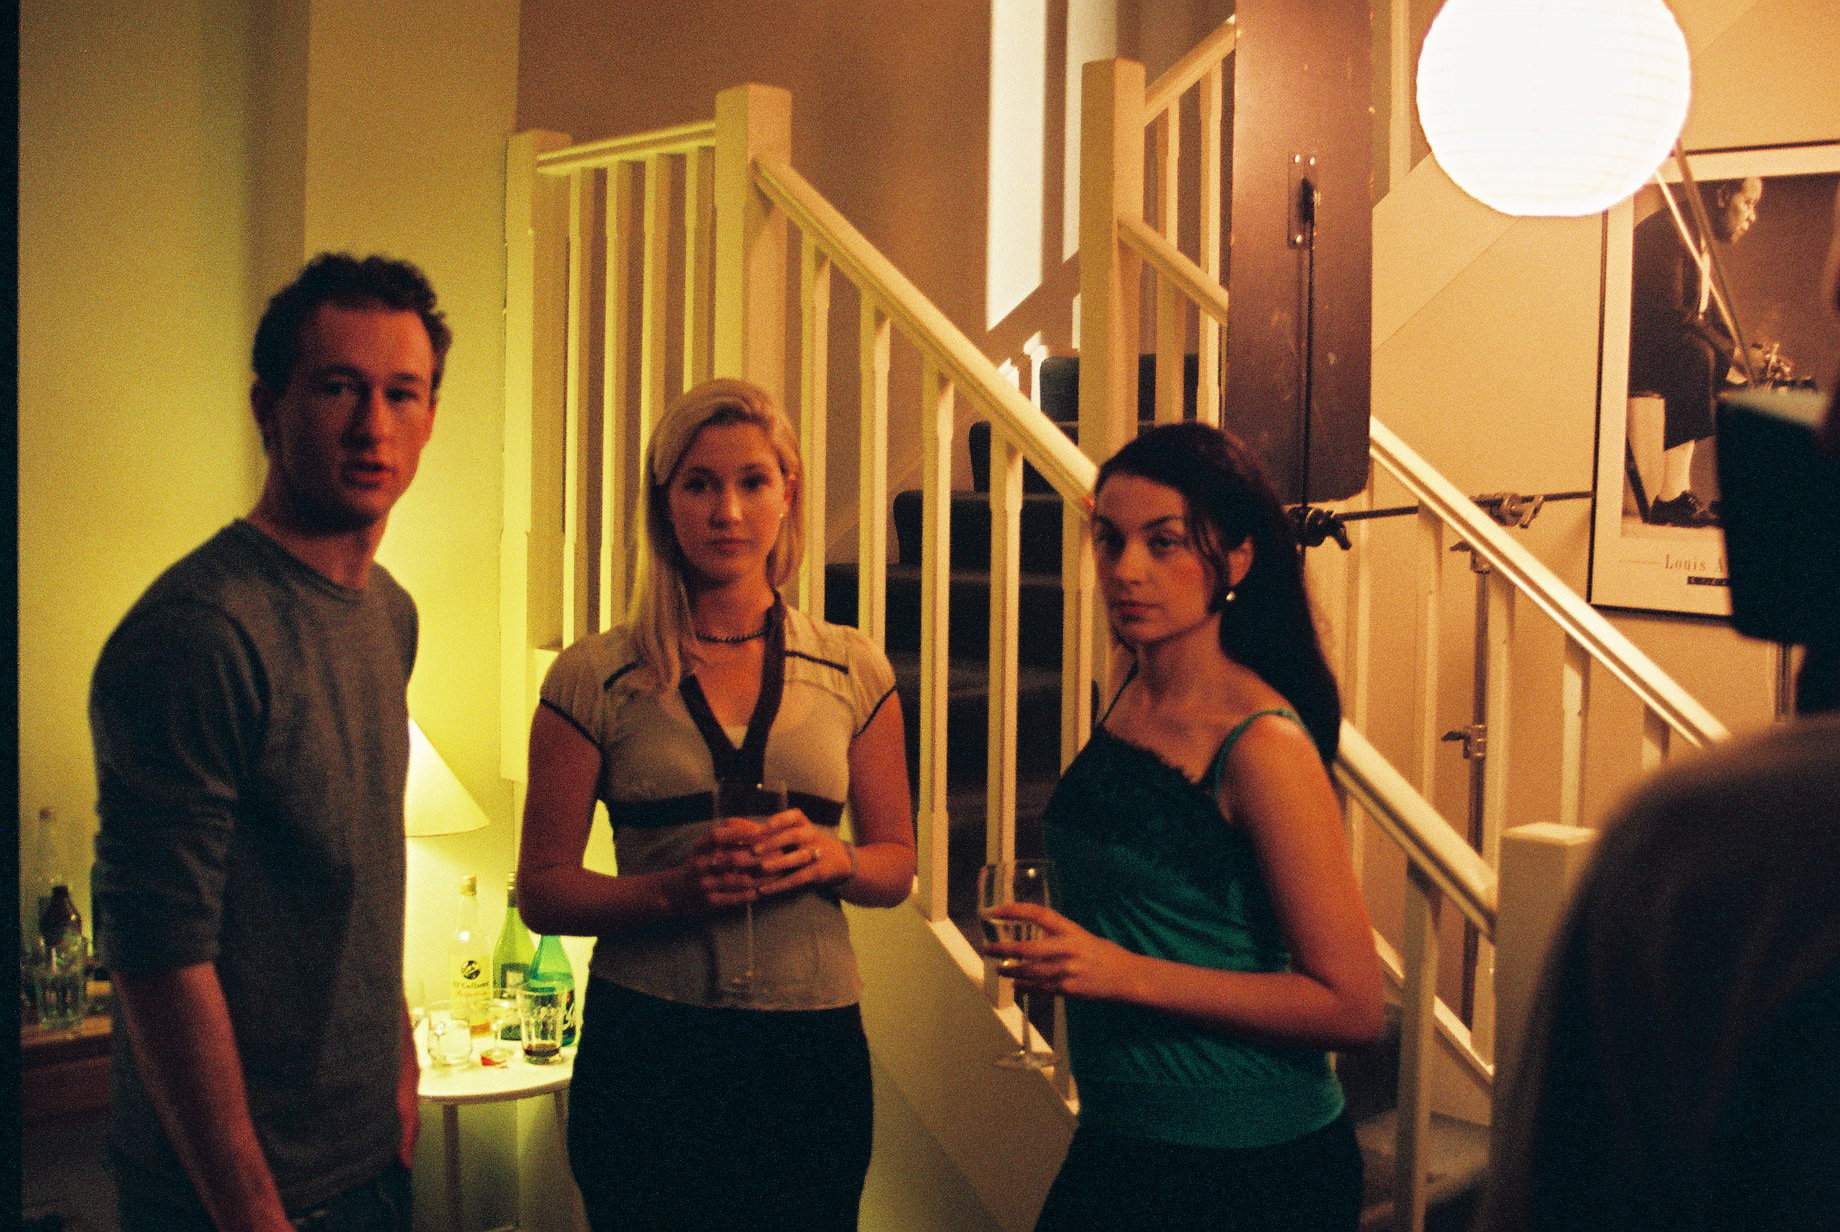 James Pratt , Zara Nicely, and Anna Lea Russo on the set of In The Middle.